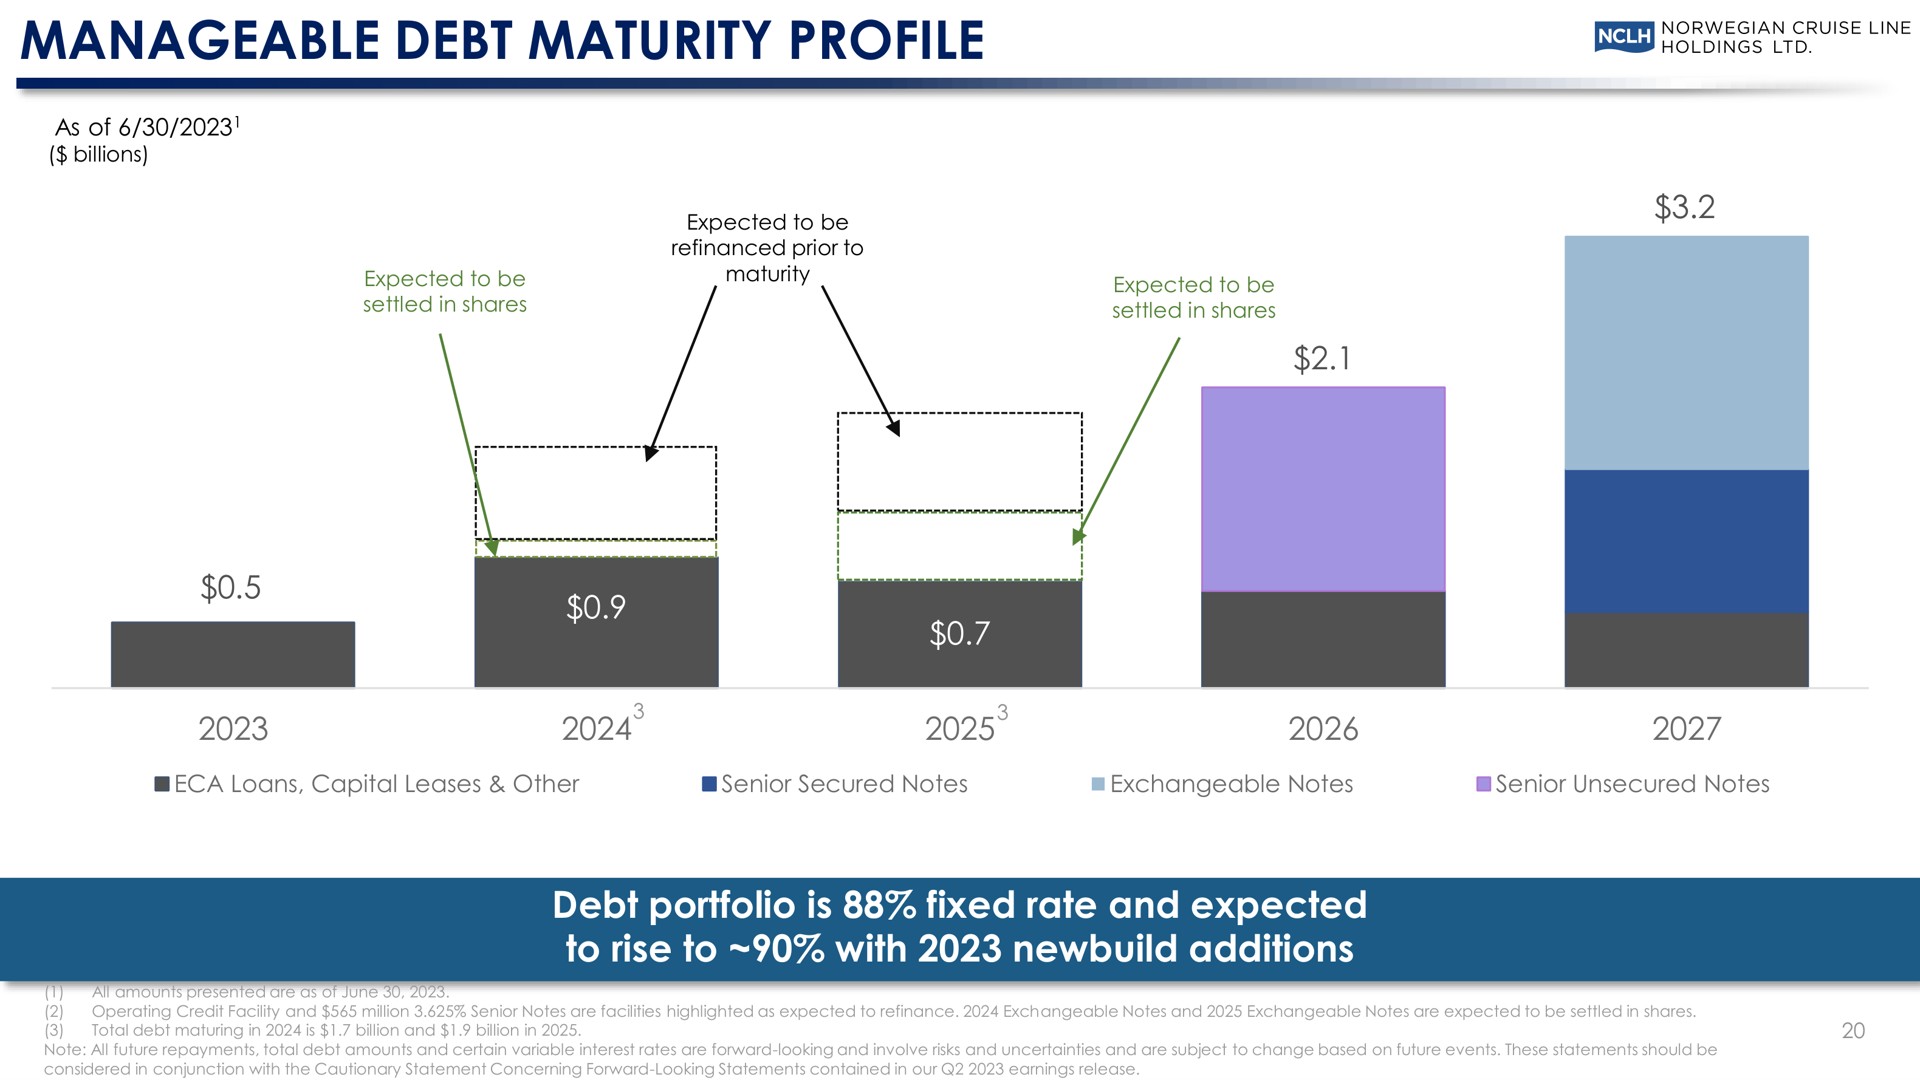 manageable debt maturity profile debt portfolio is fixed rate and expected to rise to with additions holdings | Norwegian Cruise Line